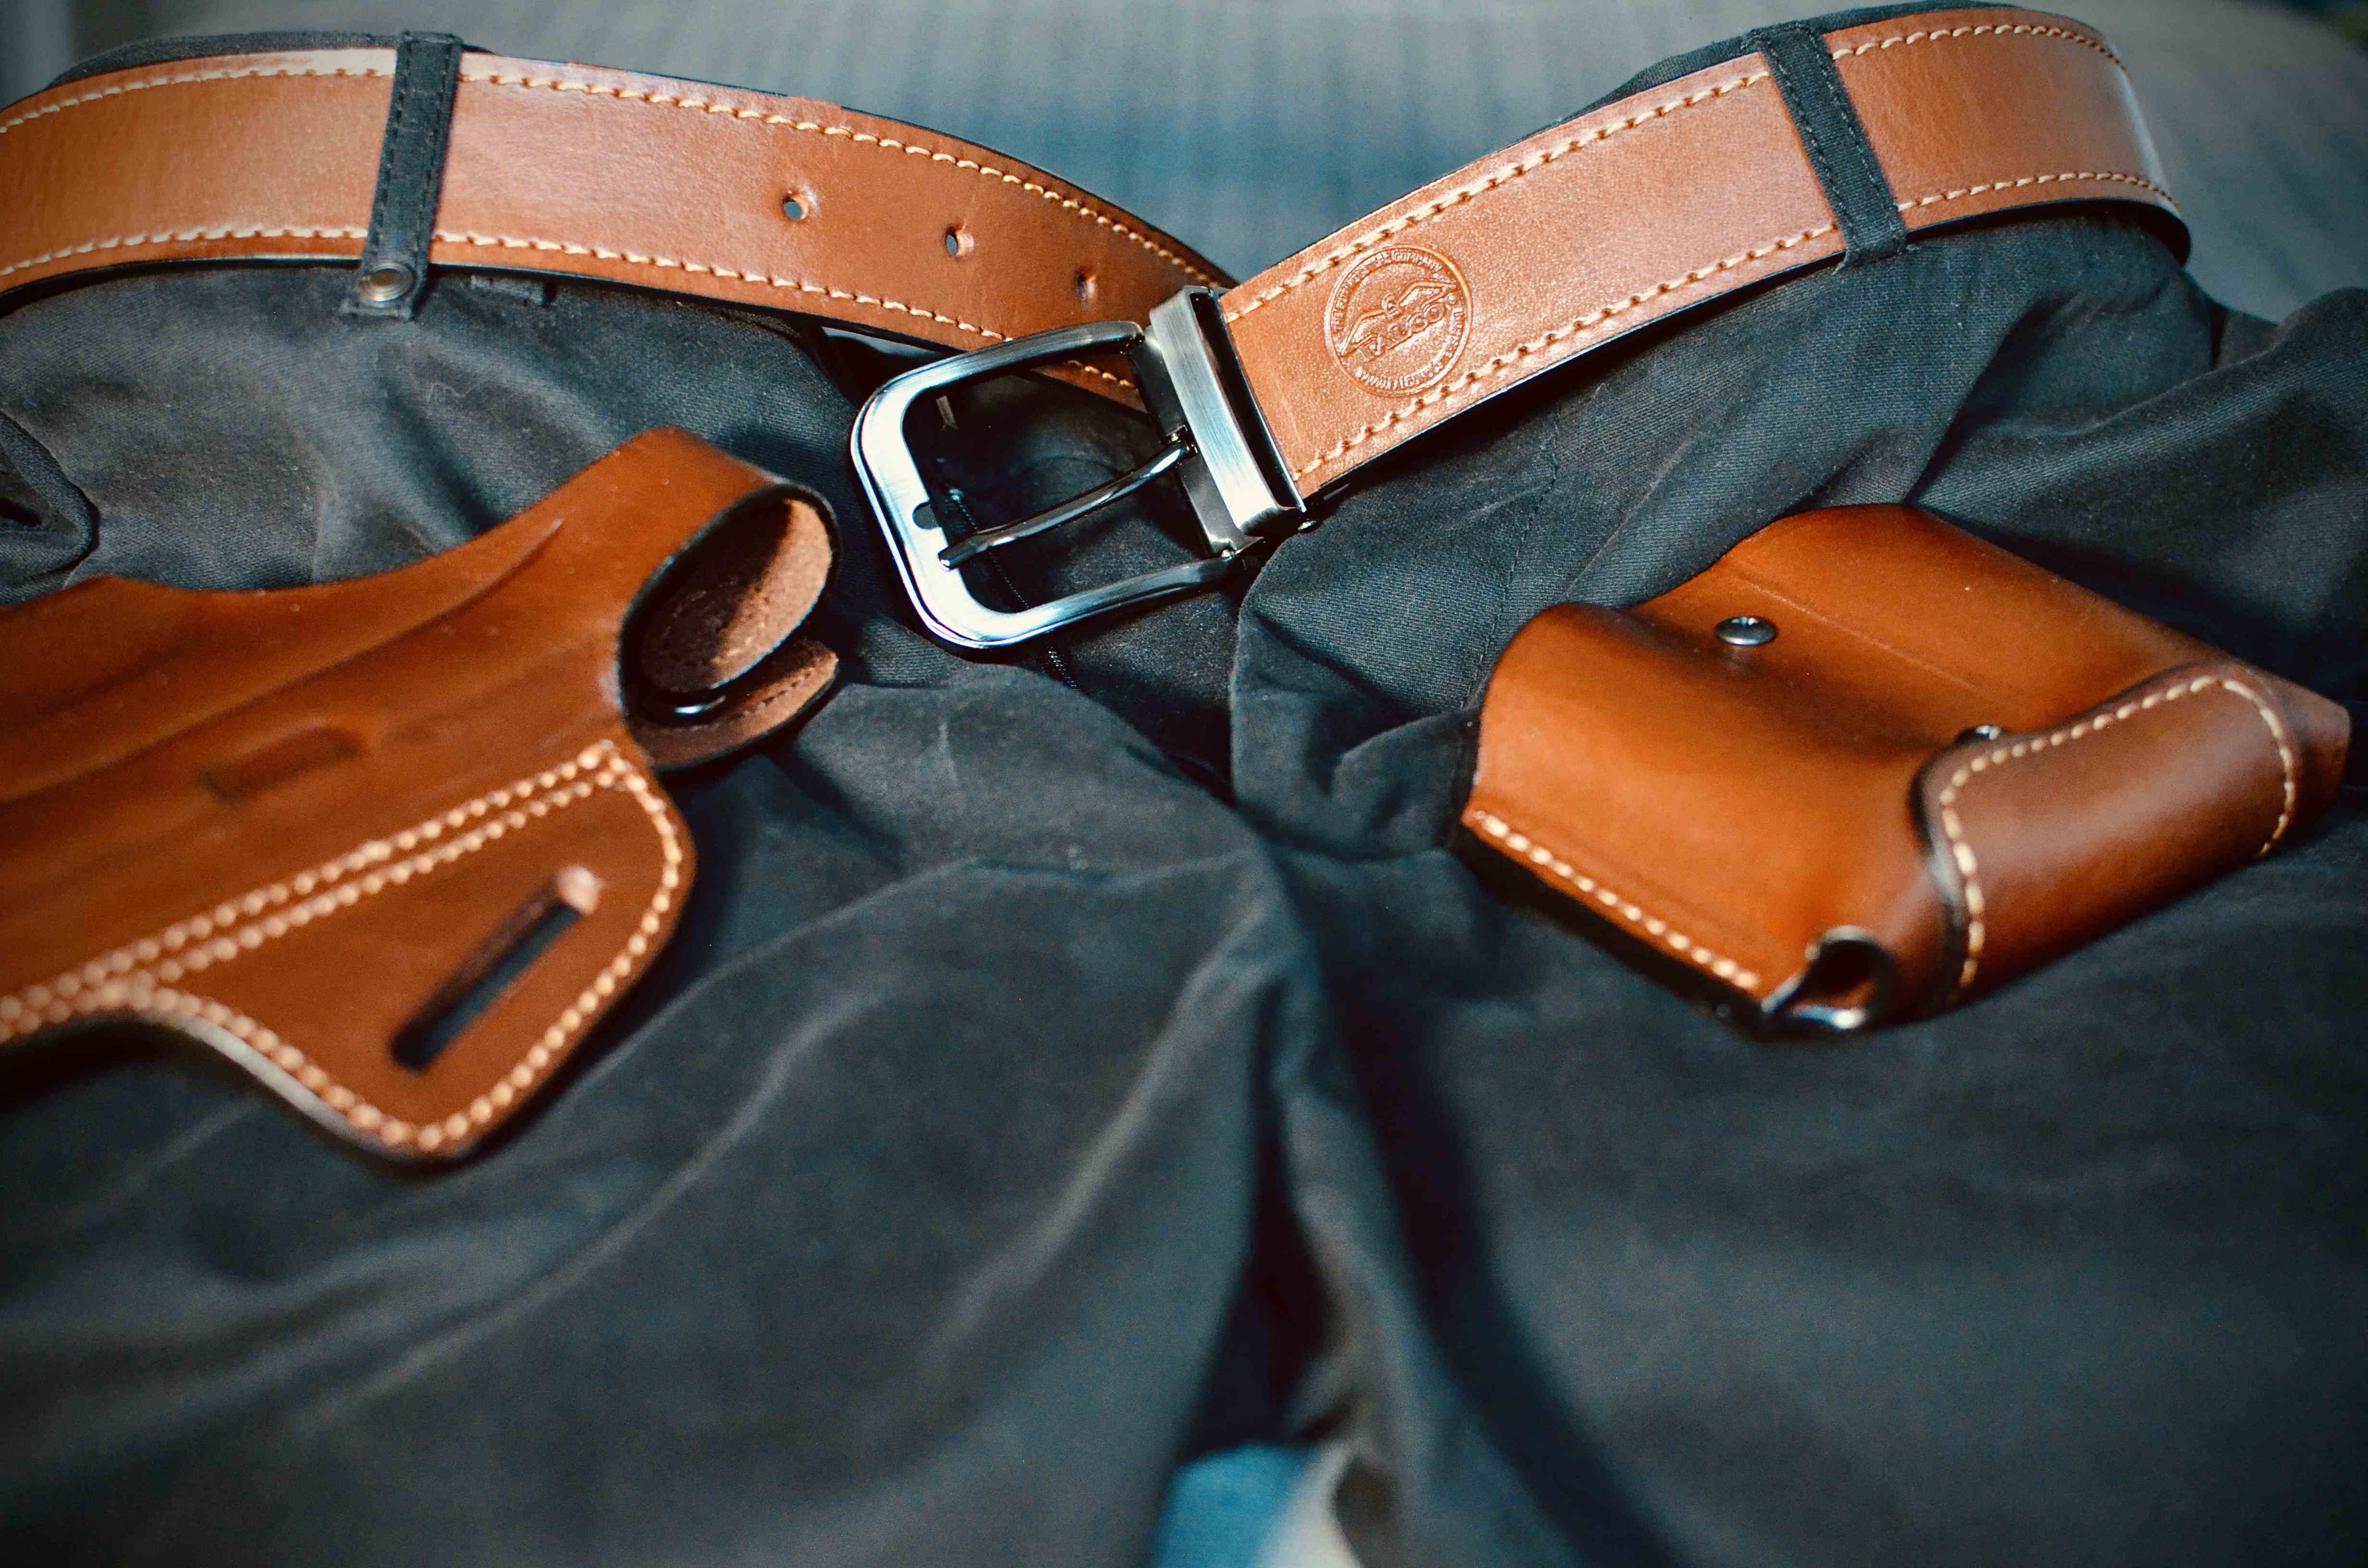 IV. Finding the Perfect Balance: Fashion and Functionality in Holsters